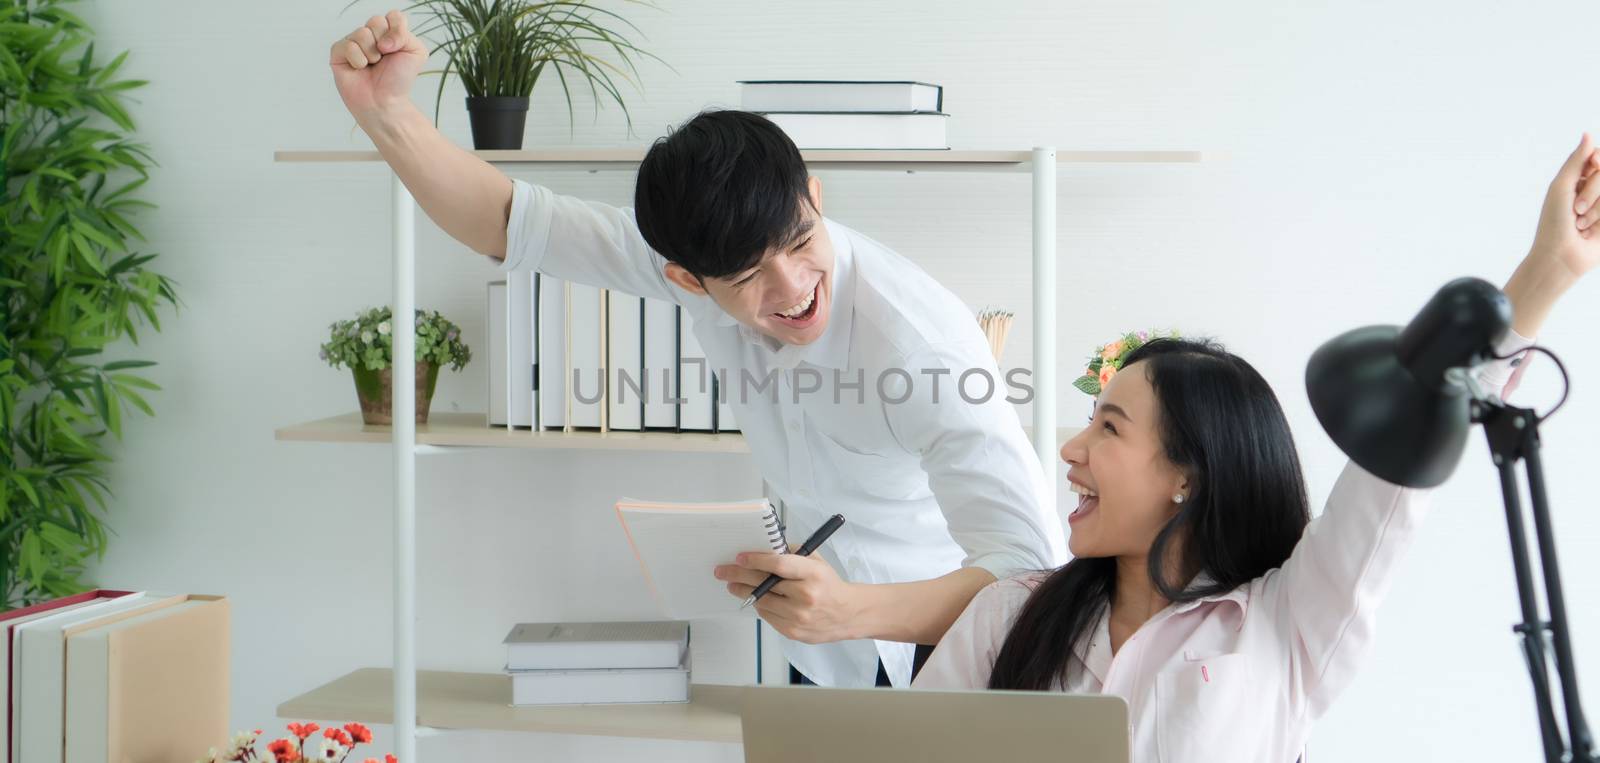 Working from home - Concept. Asian young people are working together at home happily. They are using laptops for work. They have bright, cheerful faces.